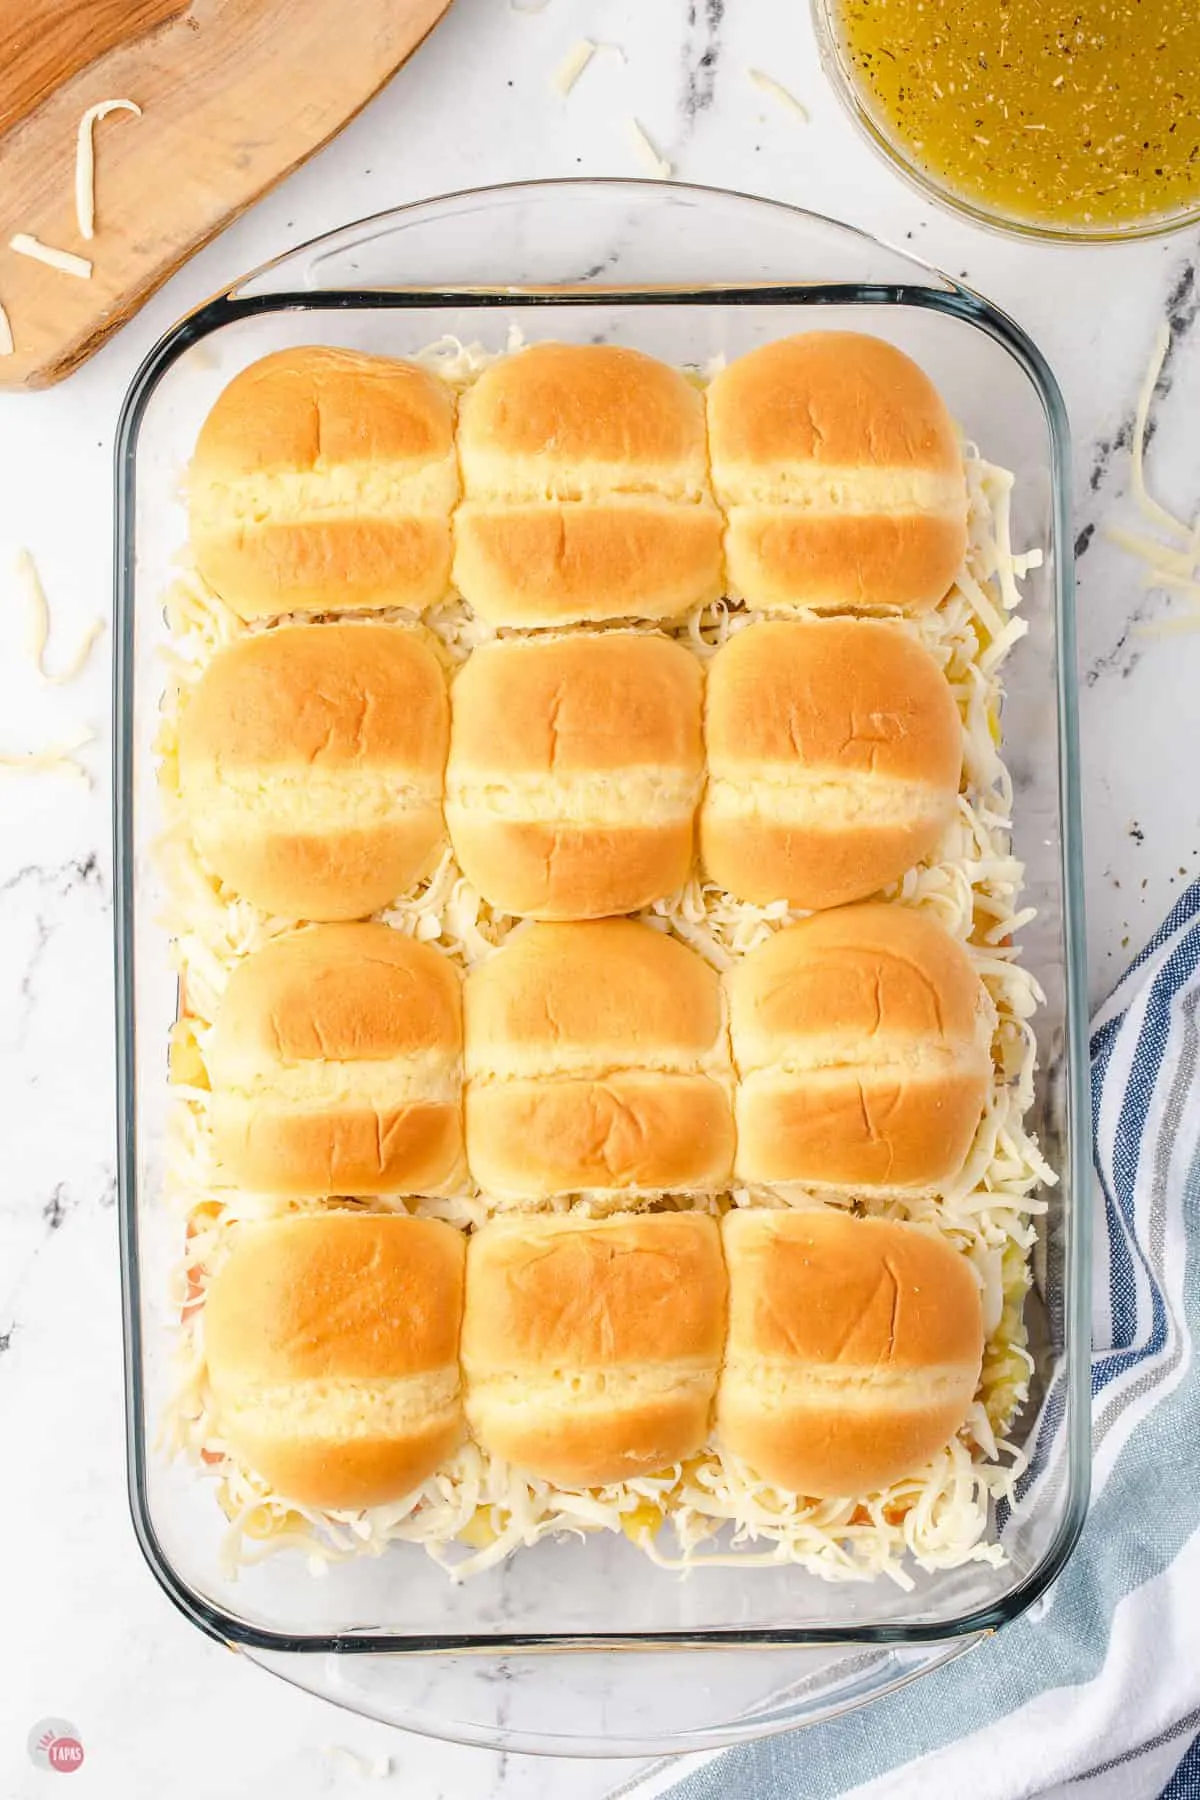 unbaked sliders in a pan